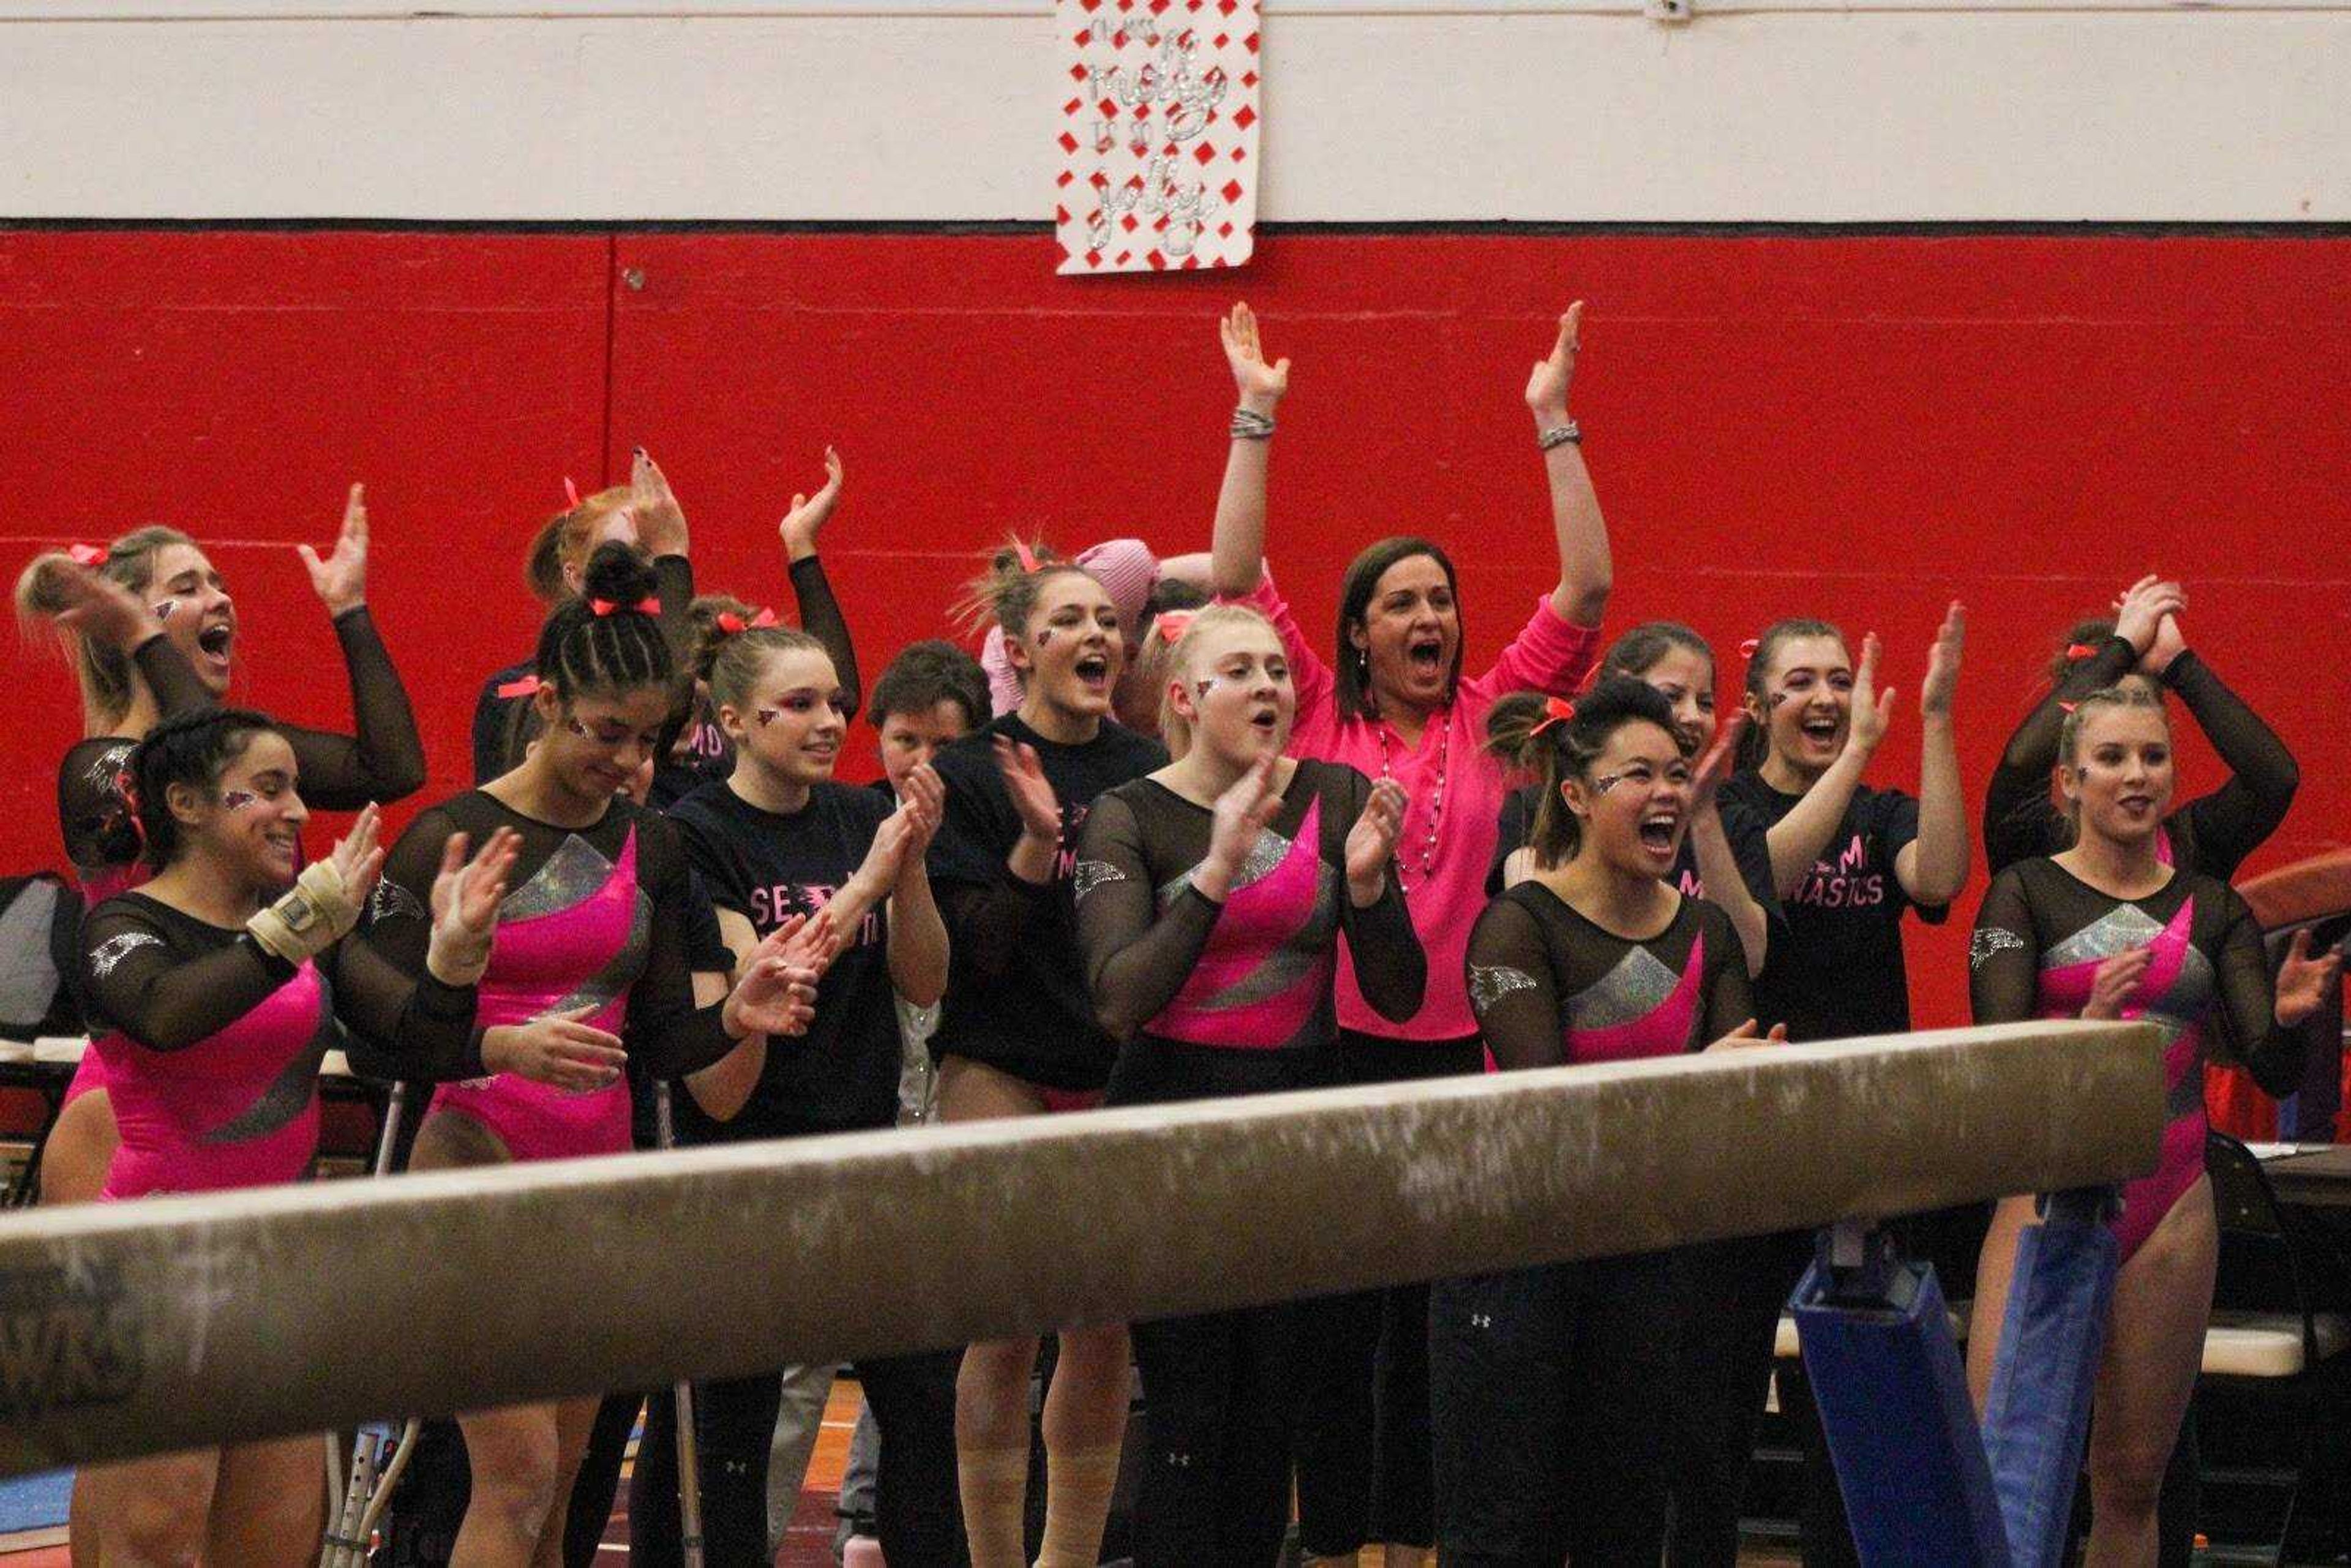 The Southeast gymnastics team cheers on a Redhawk during their home meet at the Parker Building on Feb. 7.